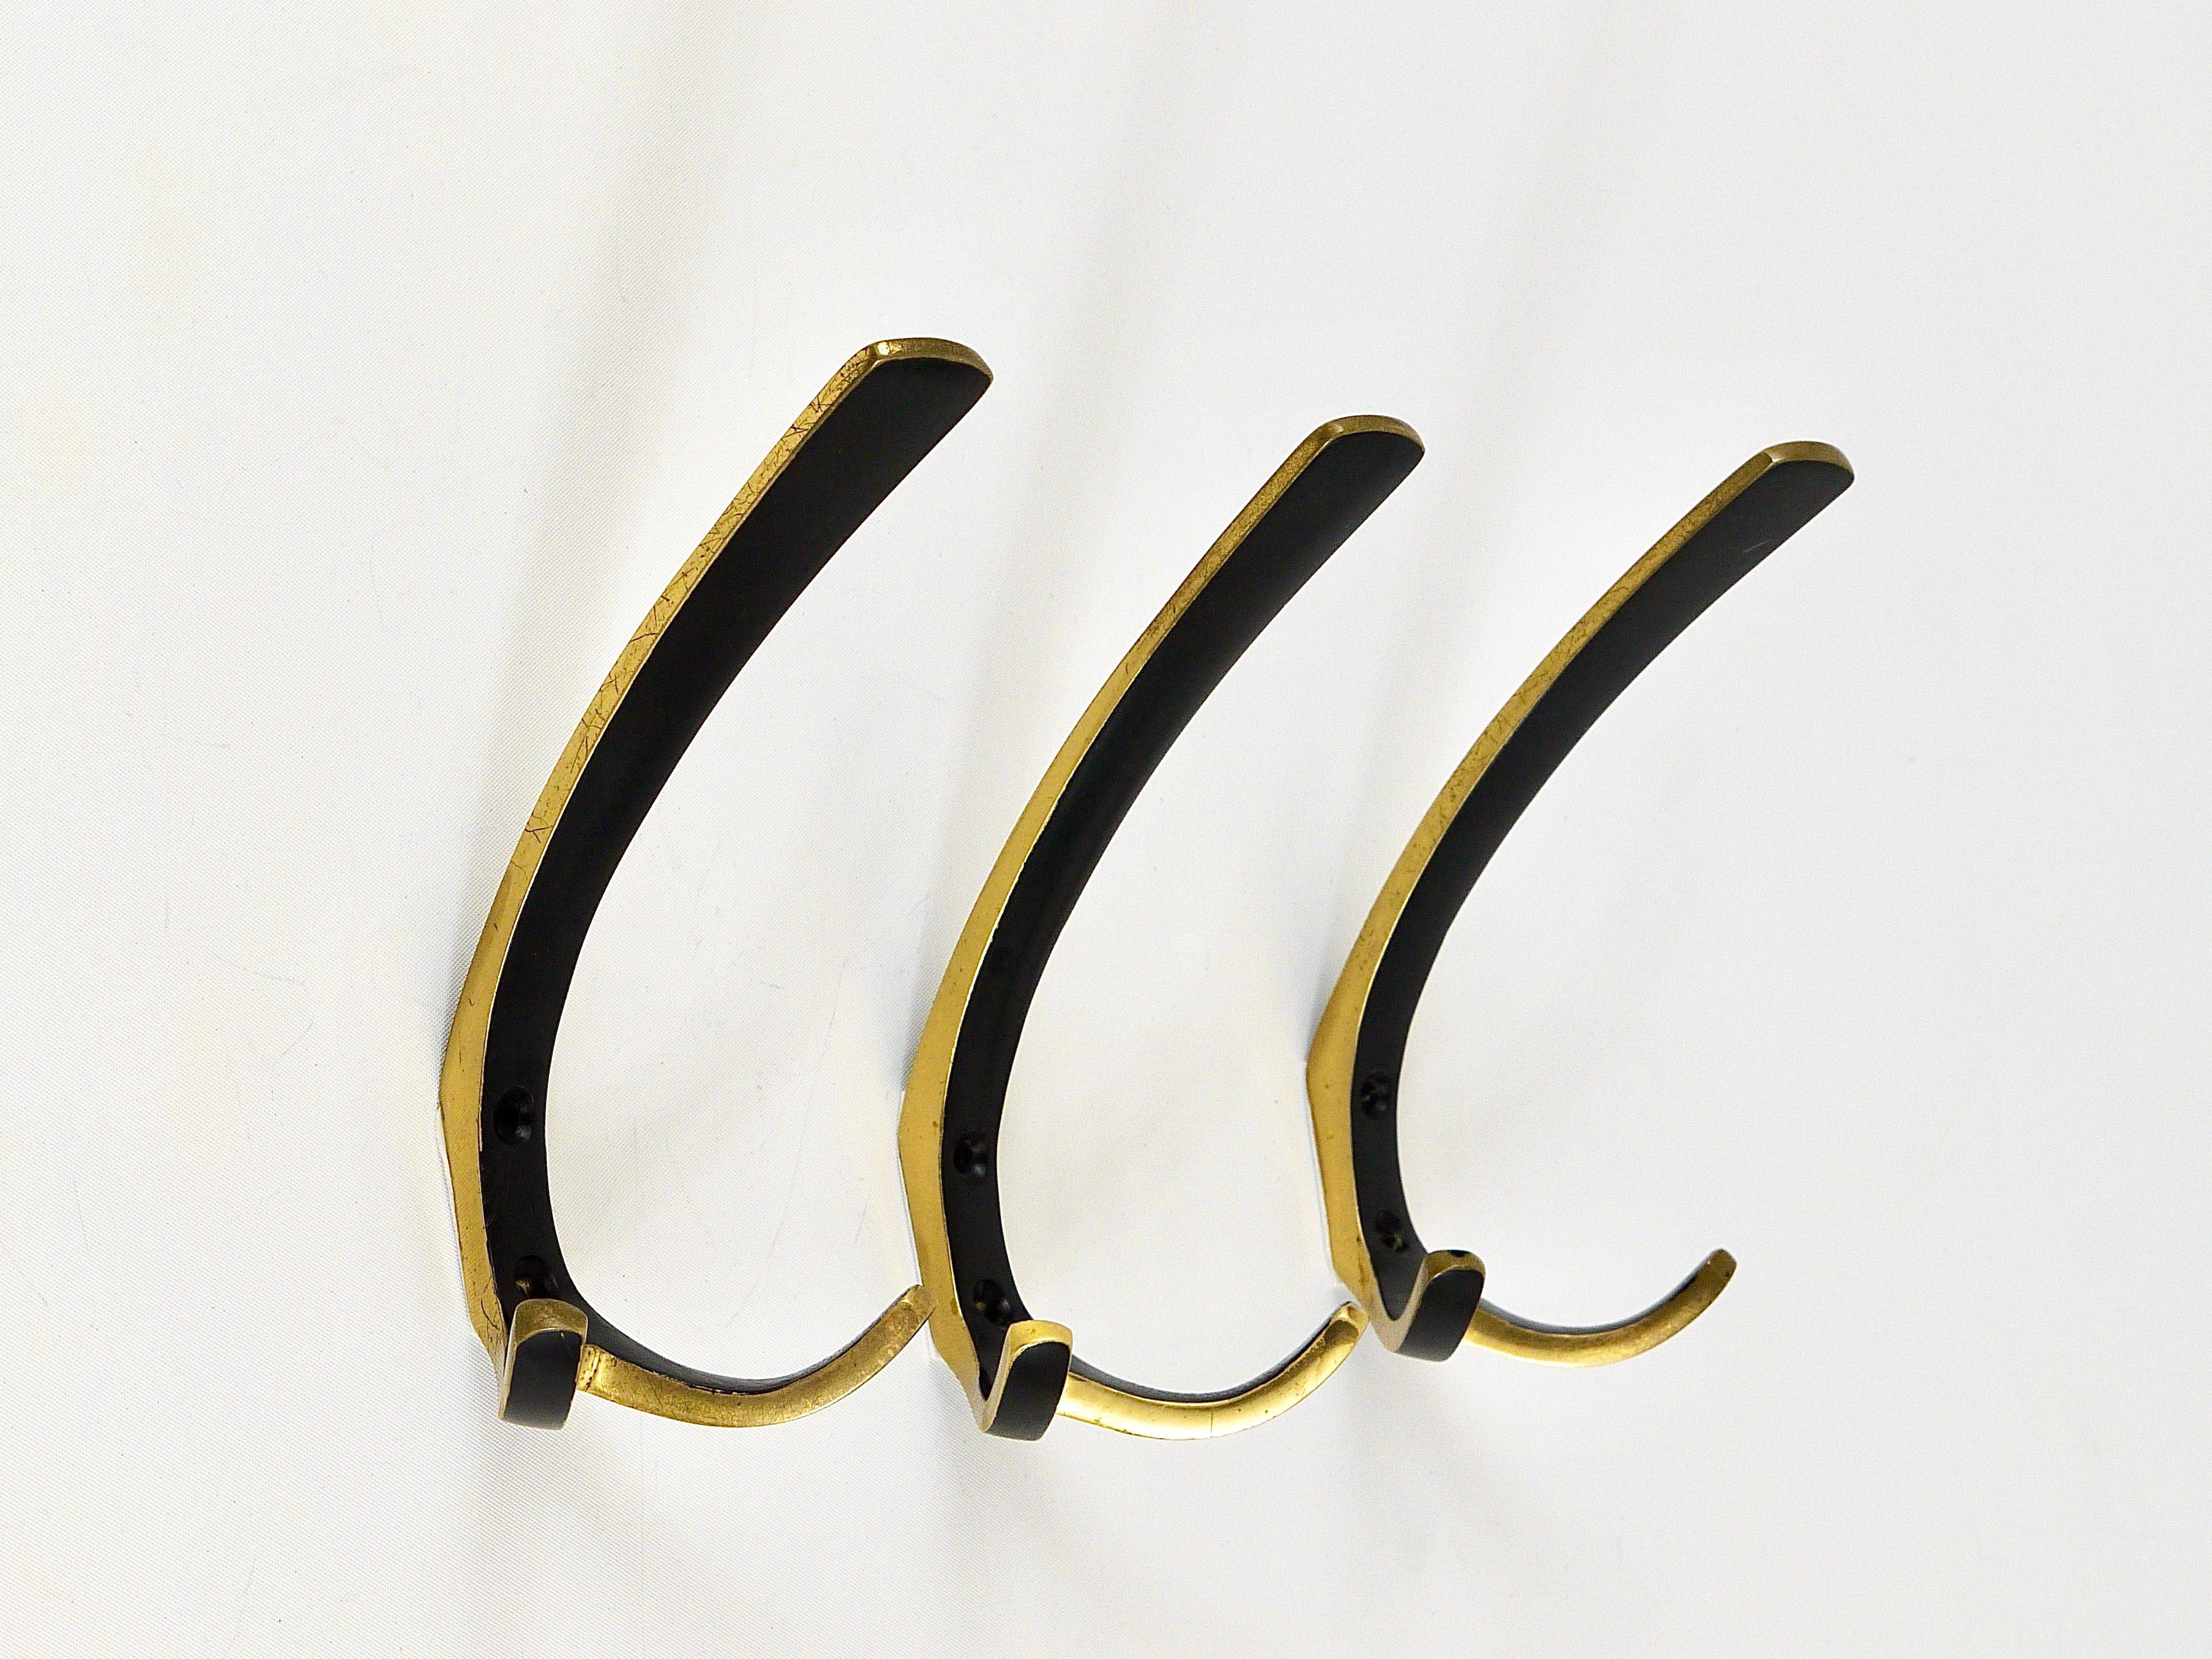 Up to 10 Midcentury Brass Double Wall Hooks by Herta Baller, Austria, 1950s For Sale 1